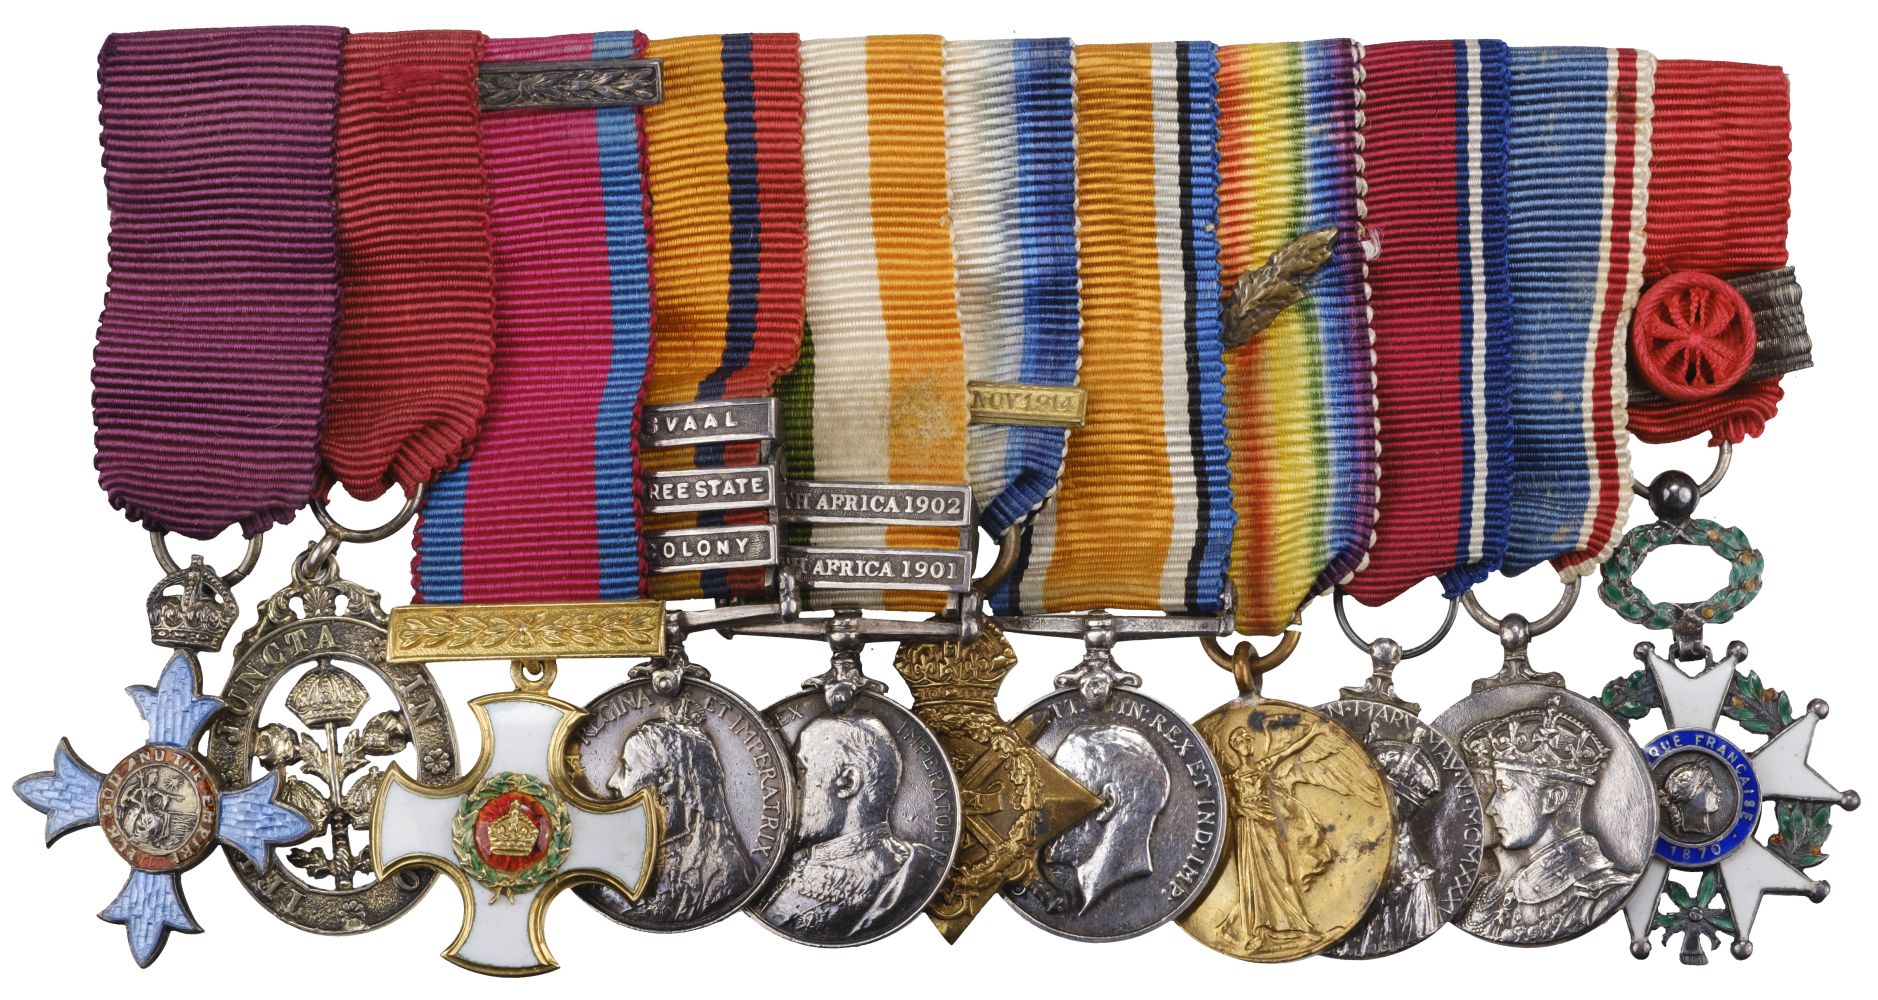 Miniature dress medals attributed to Major General Sir E. Swinton